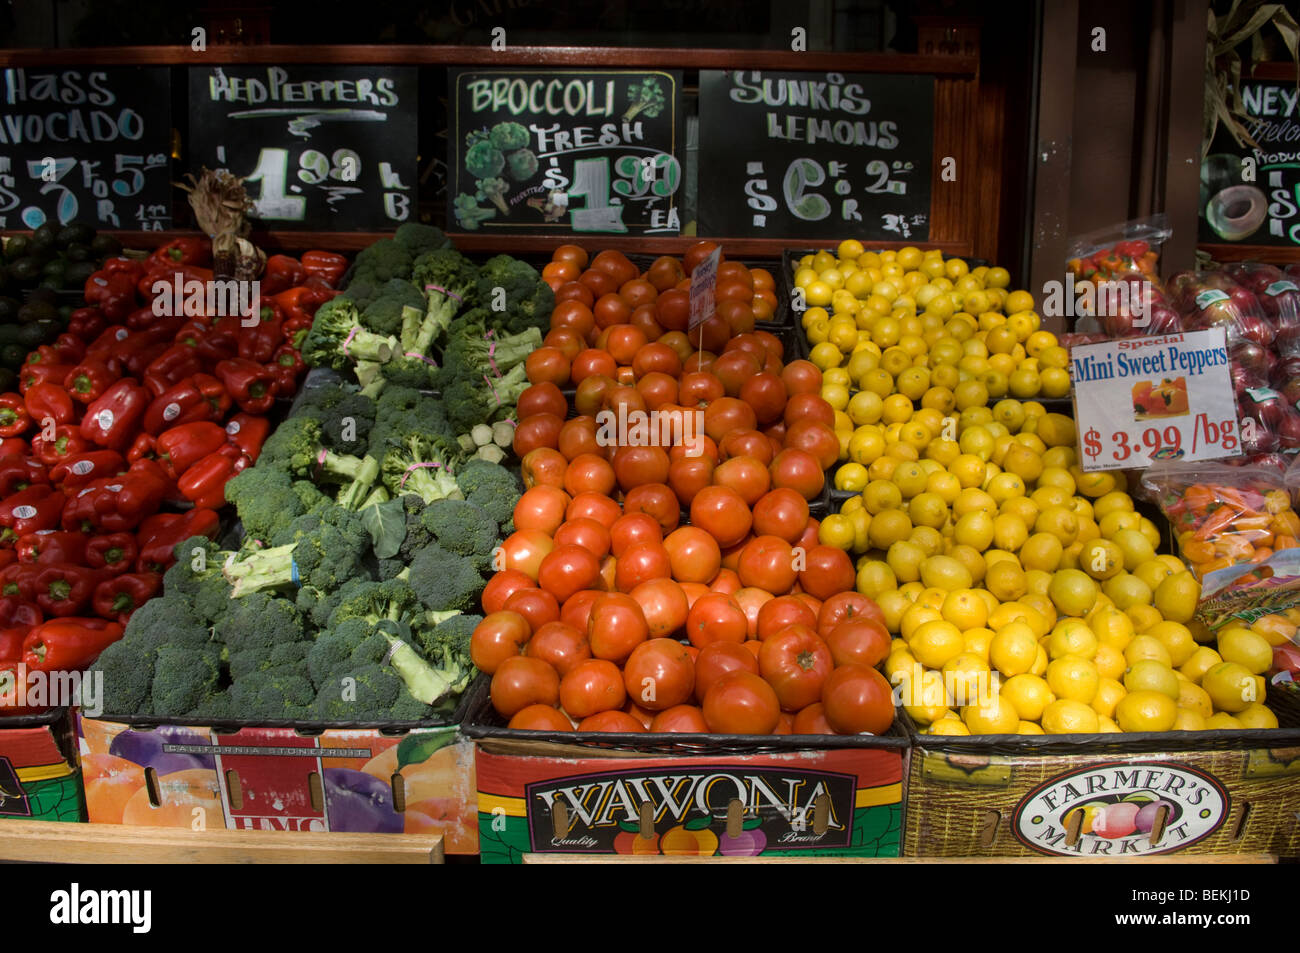 Red peppers, broccoli, tomatoes and lemons on sale outside a grocery store in New York Stock Photo